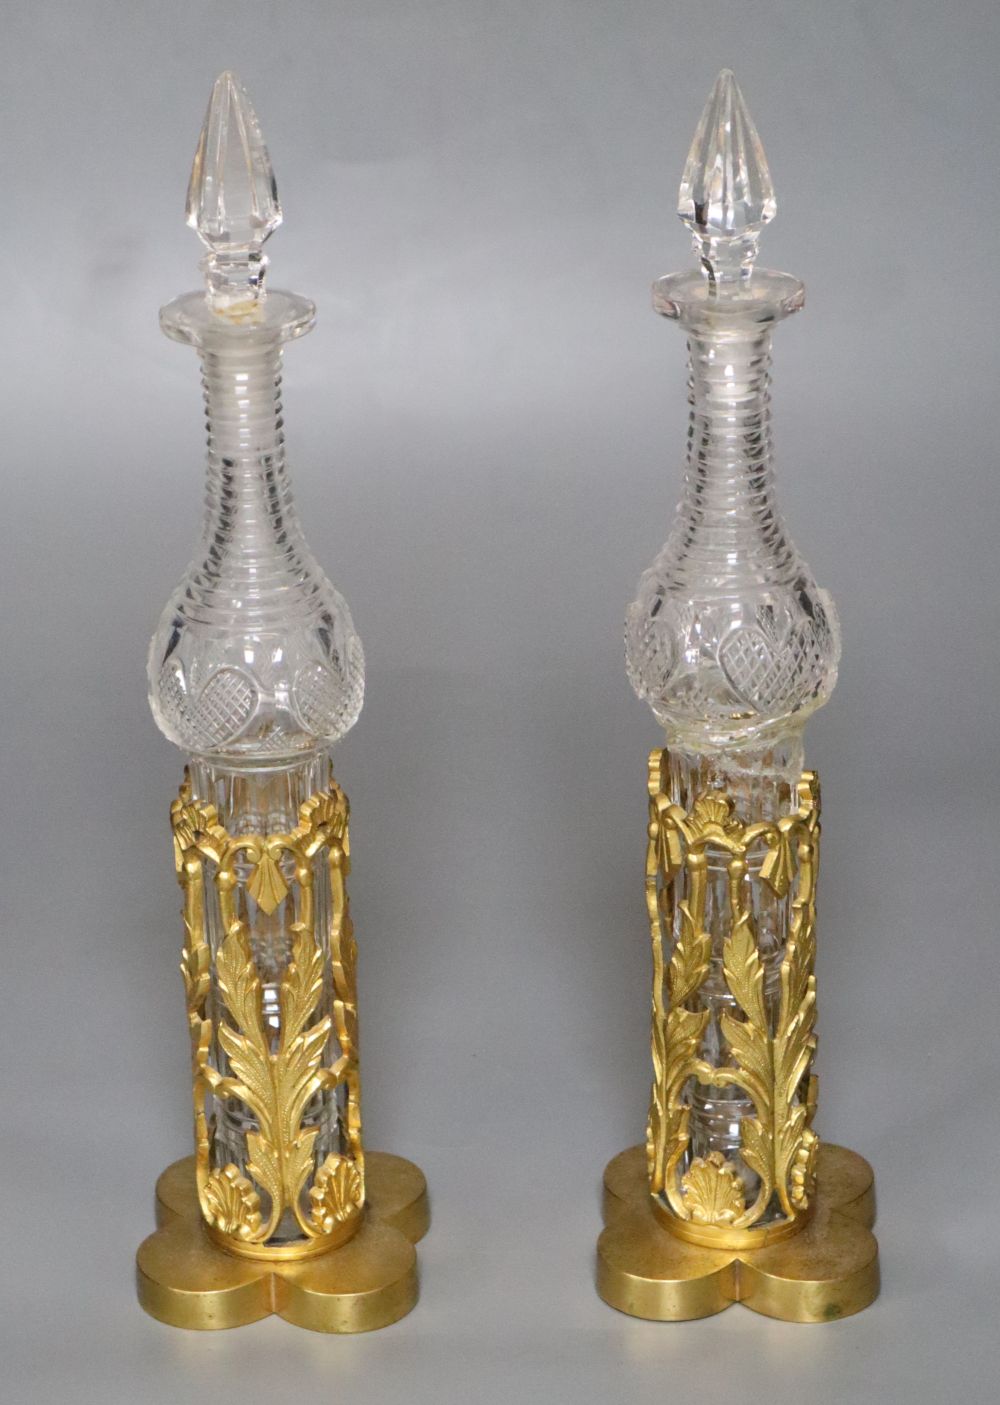 A pair of 19th century cut glass bottles and stoppers in ormolu stands (damage) and sundry other glassware